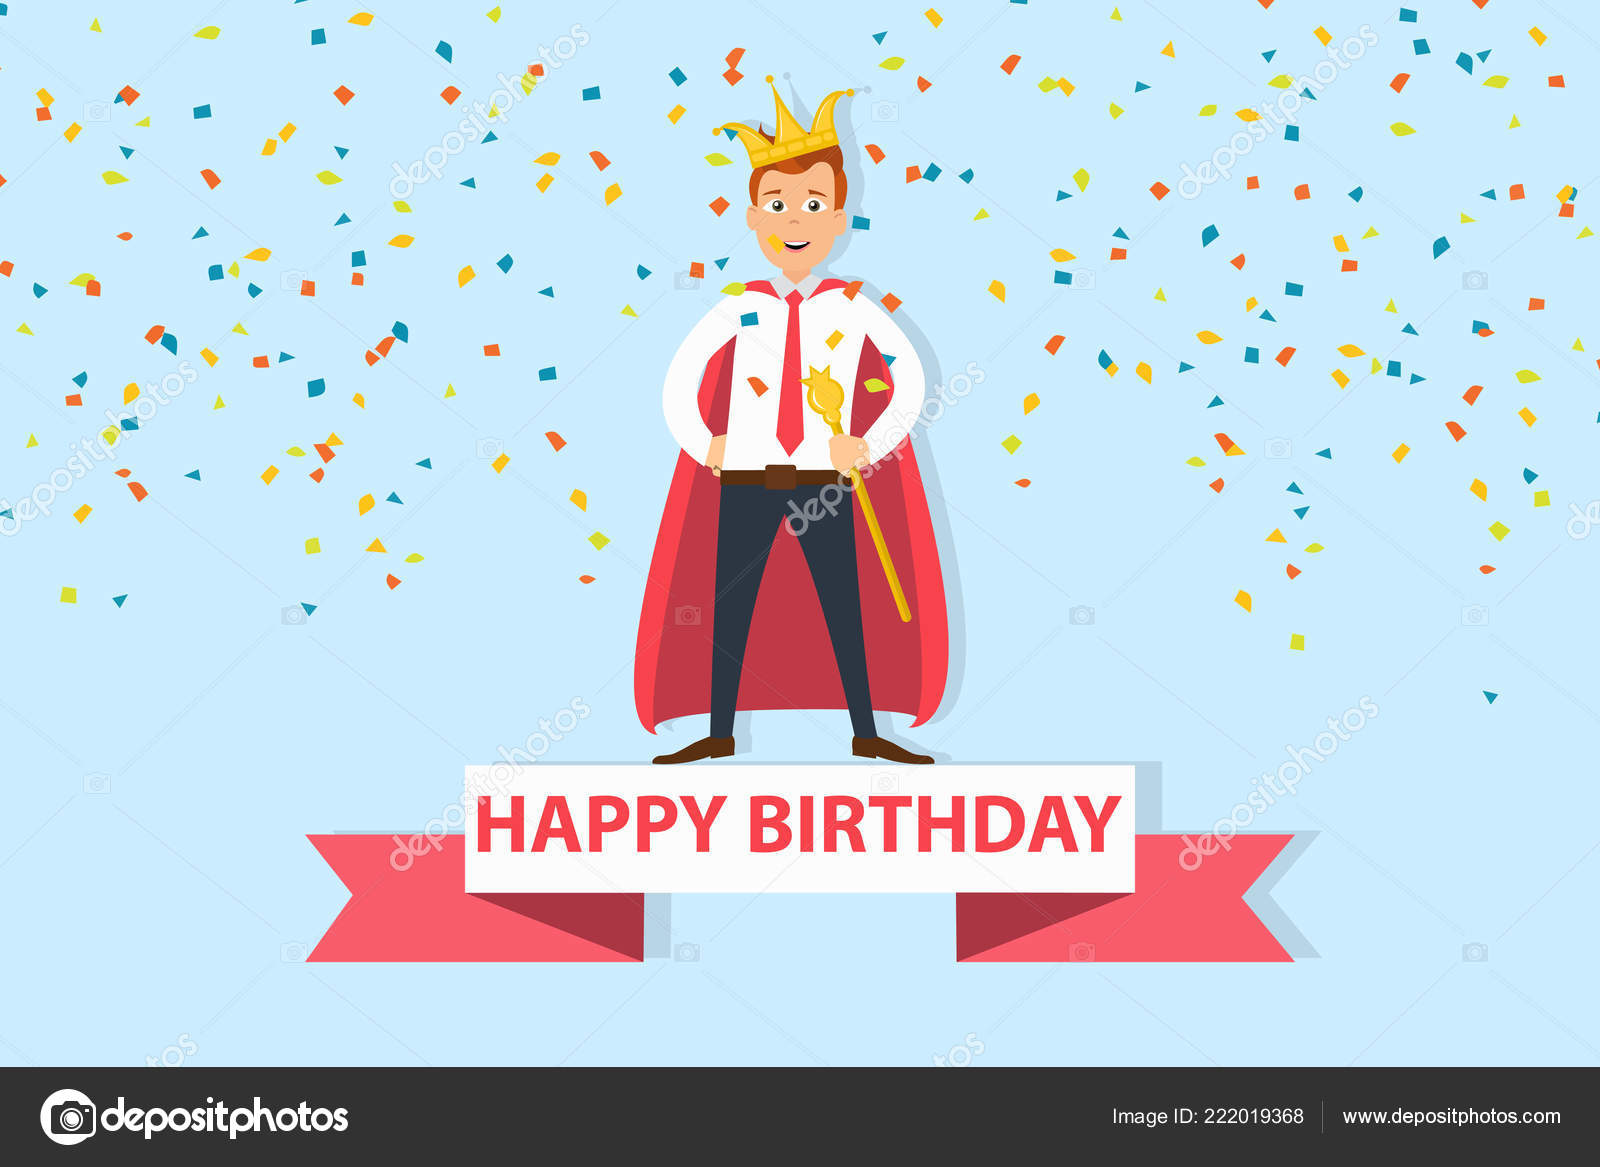 Eps Vector Illustration Cheerful Man King Costume Standing Flying Confetti Vector Image By C Scarlette23 Vector Stock